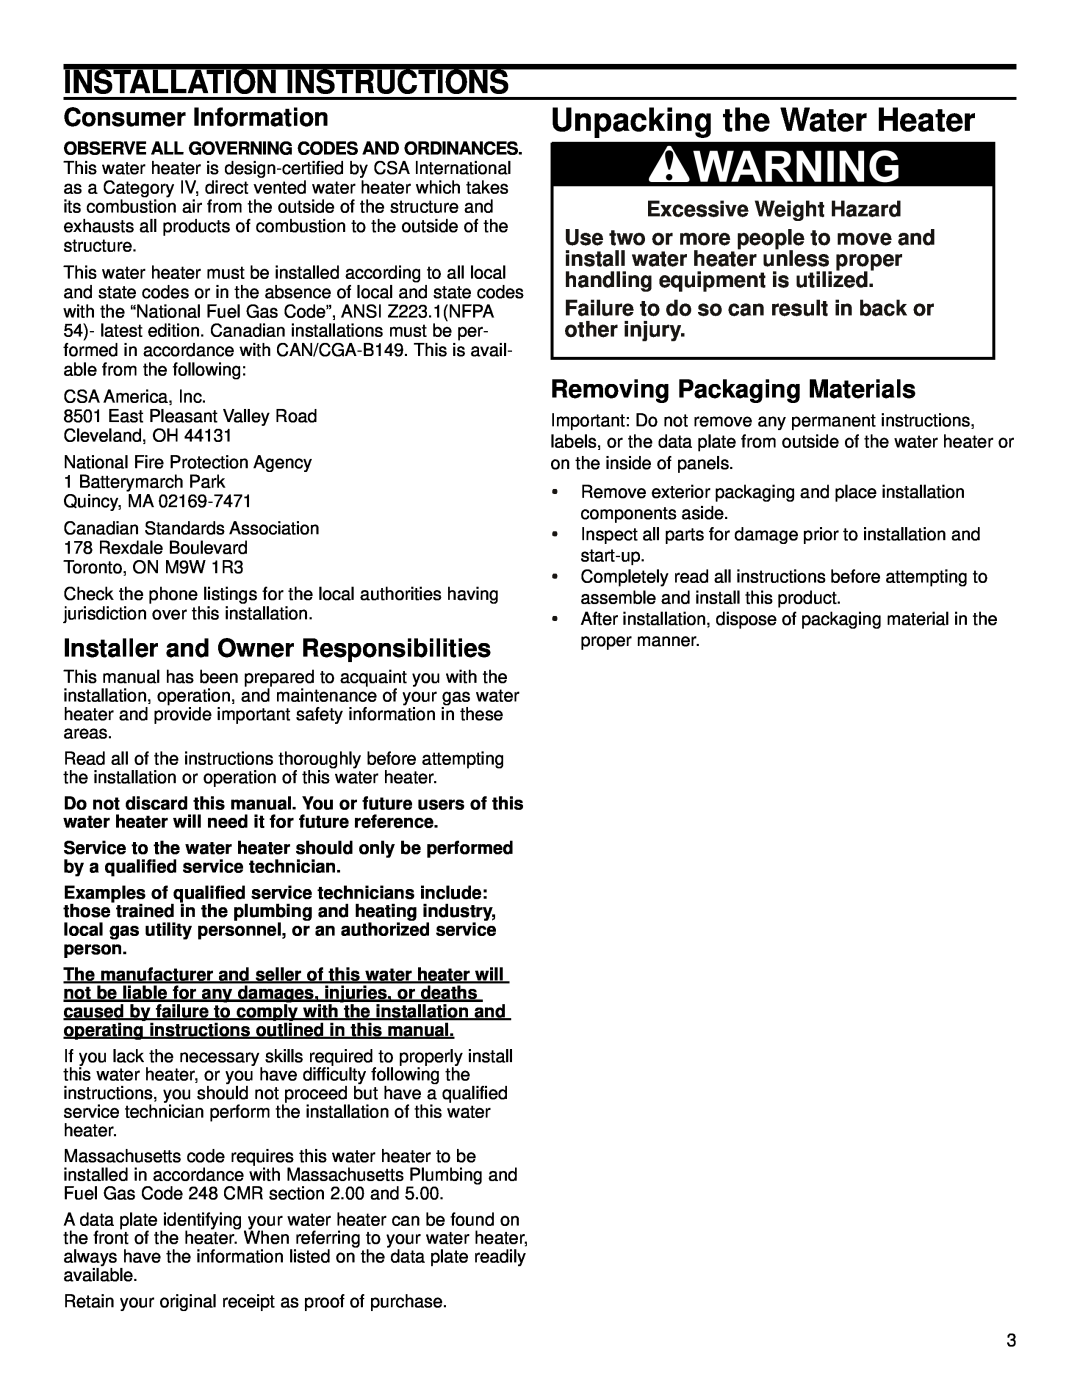 Polaris PR 175-50 3NV OR 3PV Installation Instructions, Unpacking the Water Heater, Consumer Information 